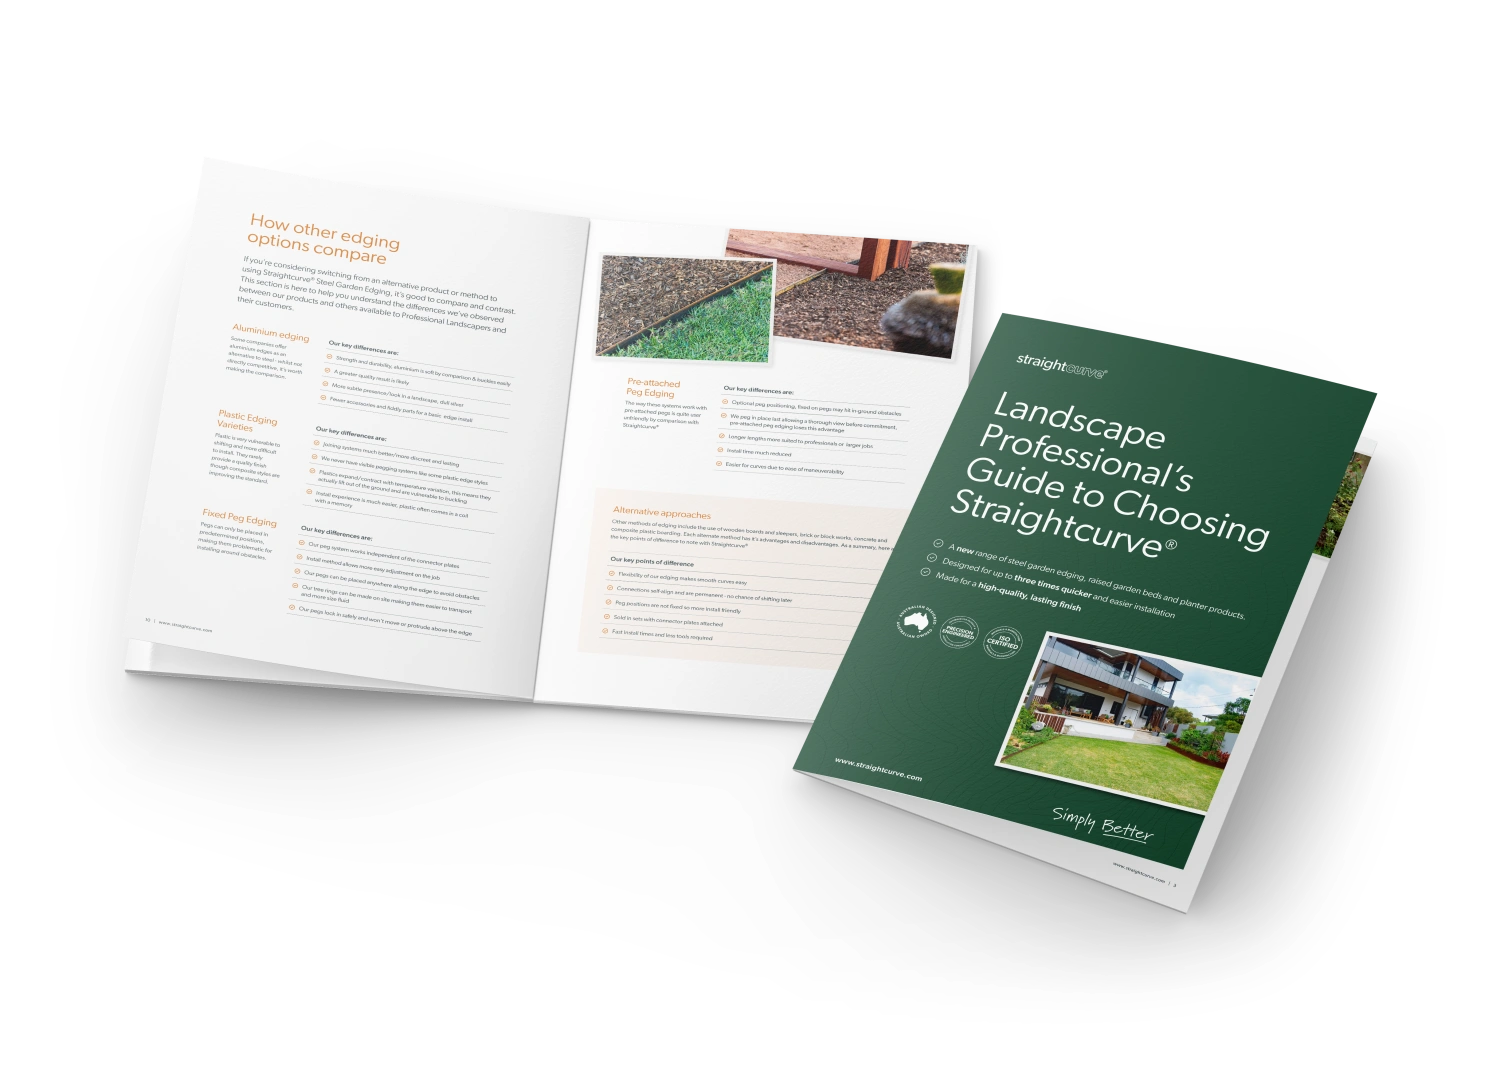 Thumbnail image of the Landscape Professionals Guide to Choosing Straightcurve - cover and inside spread